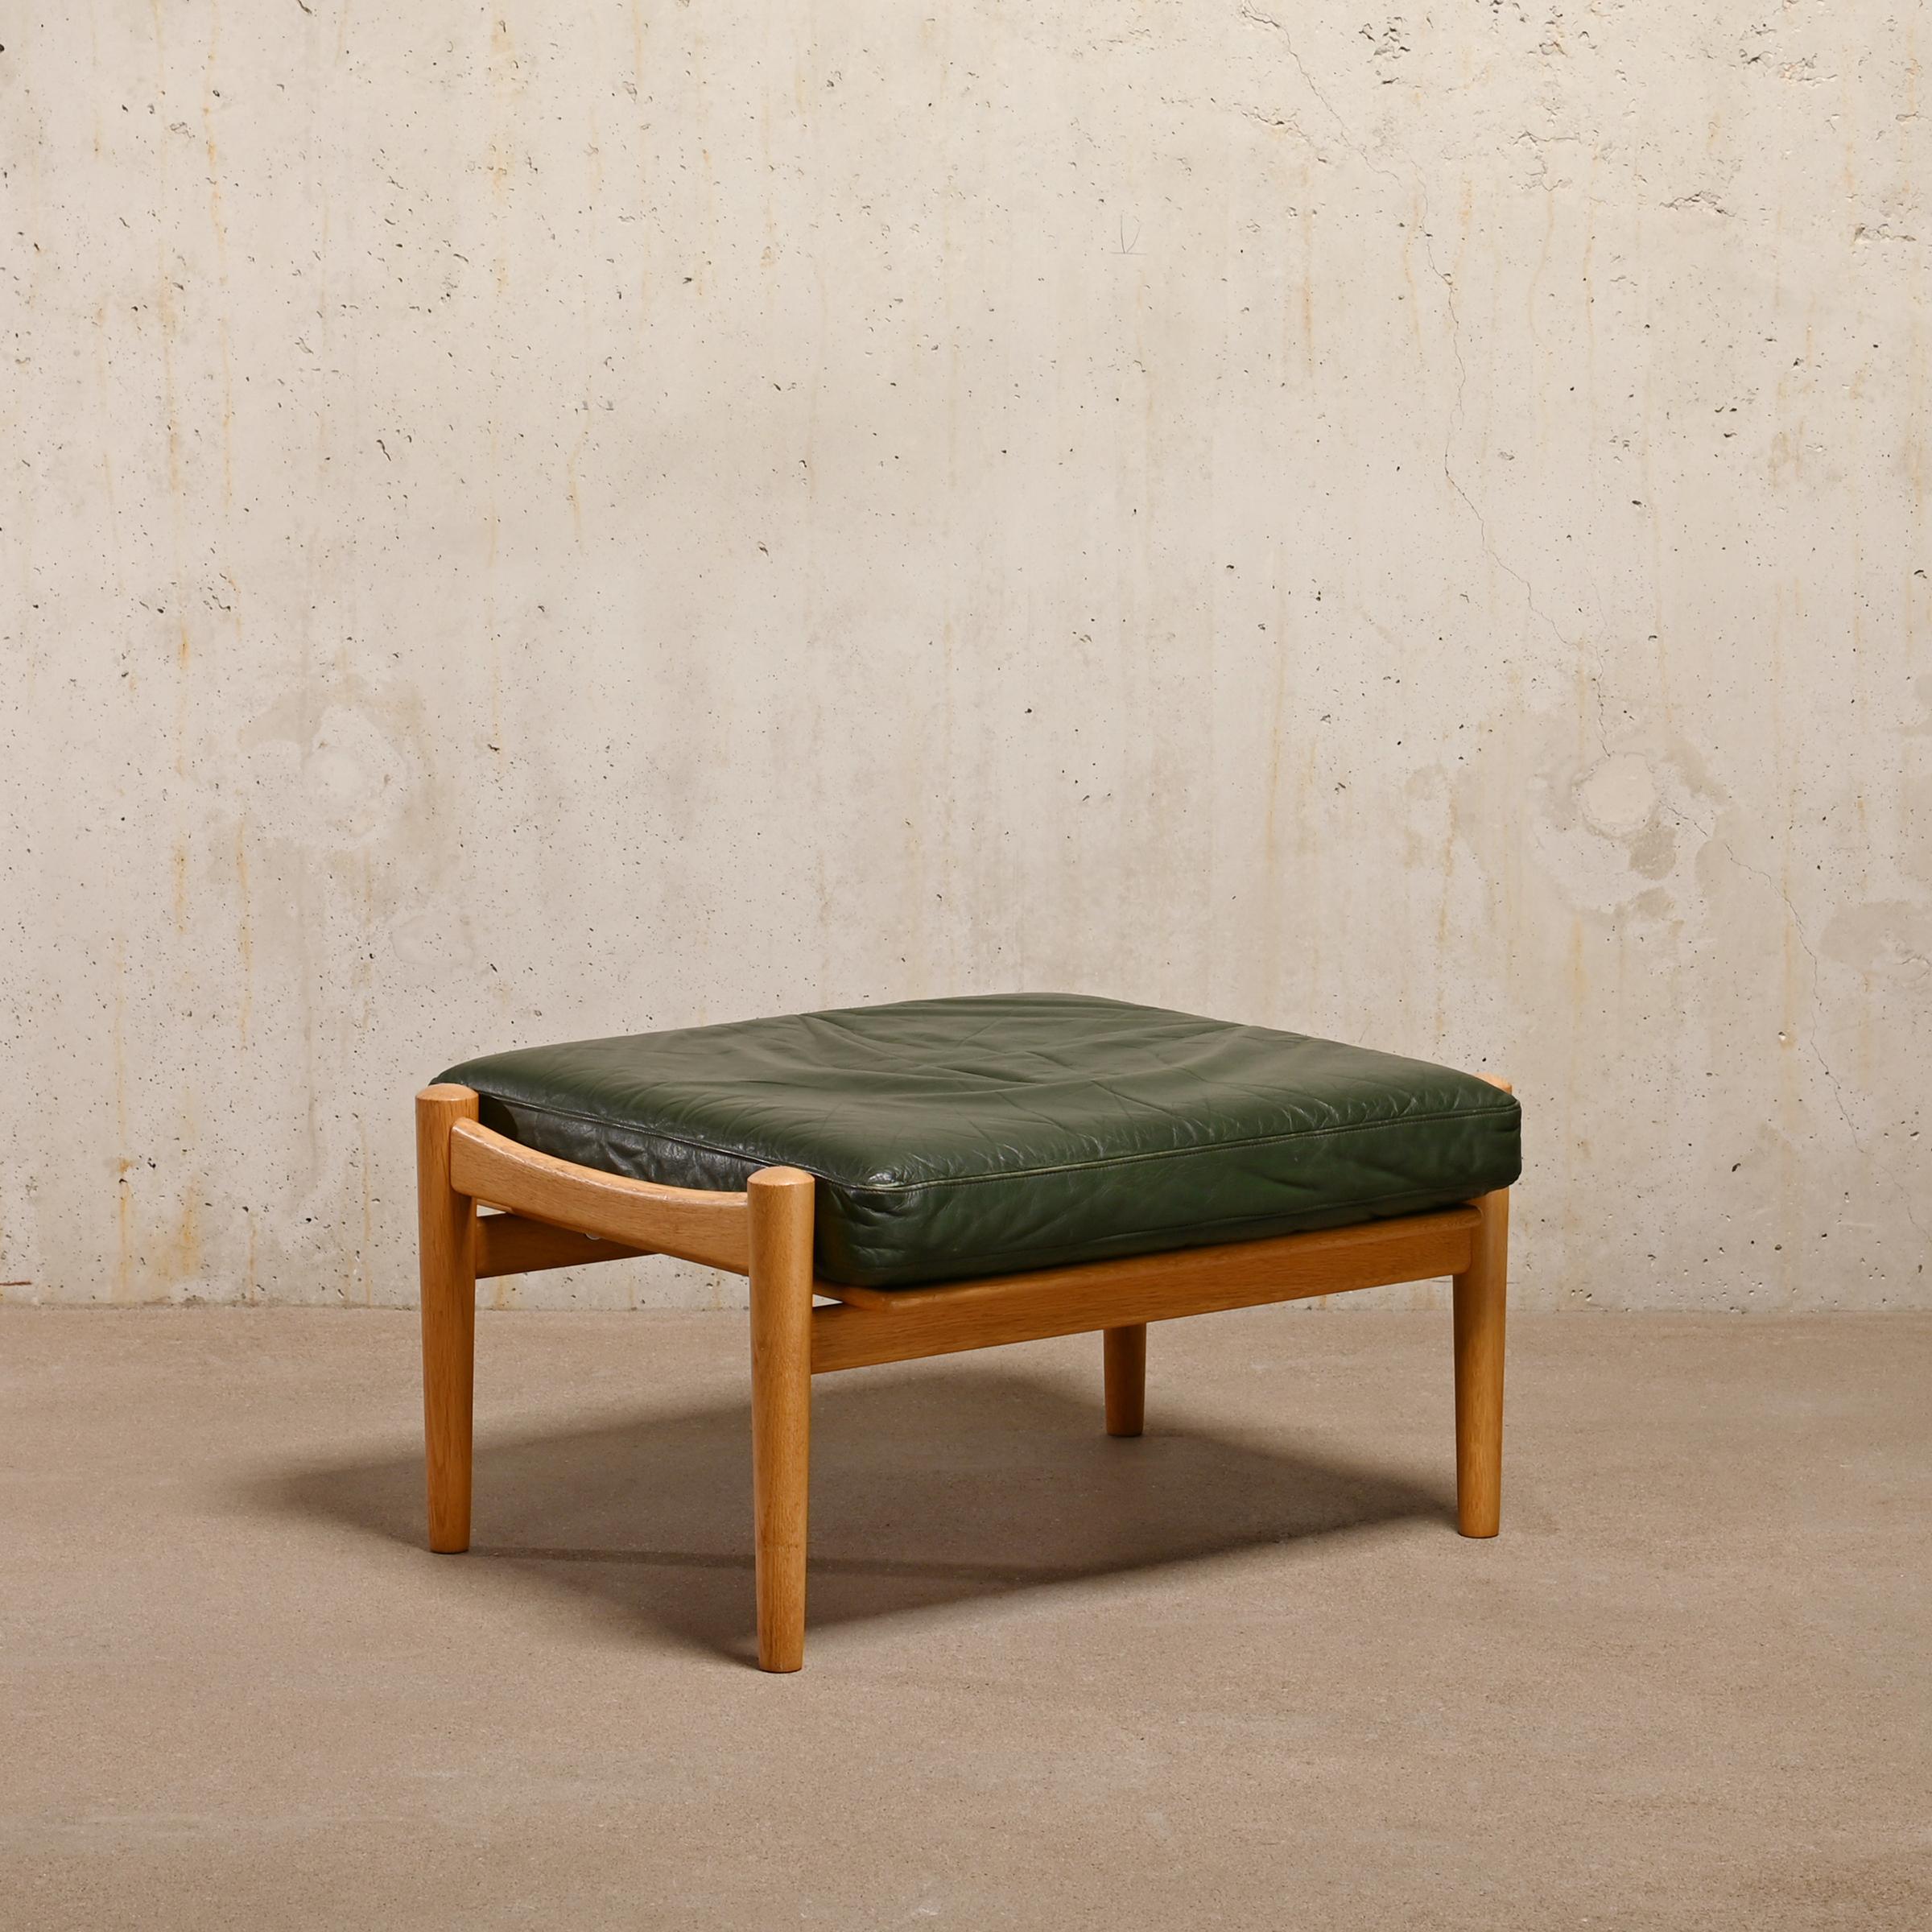 Hans J. Wegner GE530 Lounge Chair and Ottoman in Oak and Green Leather, GETAMA 2